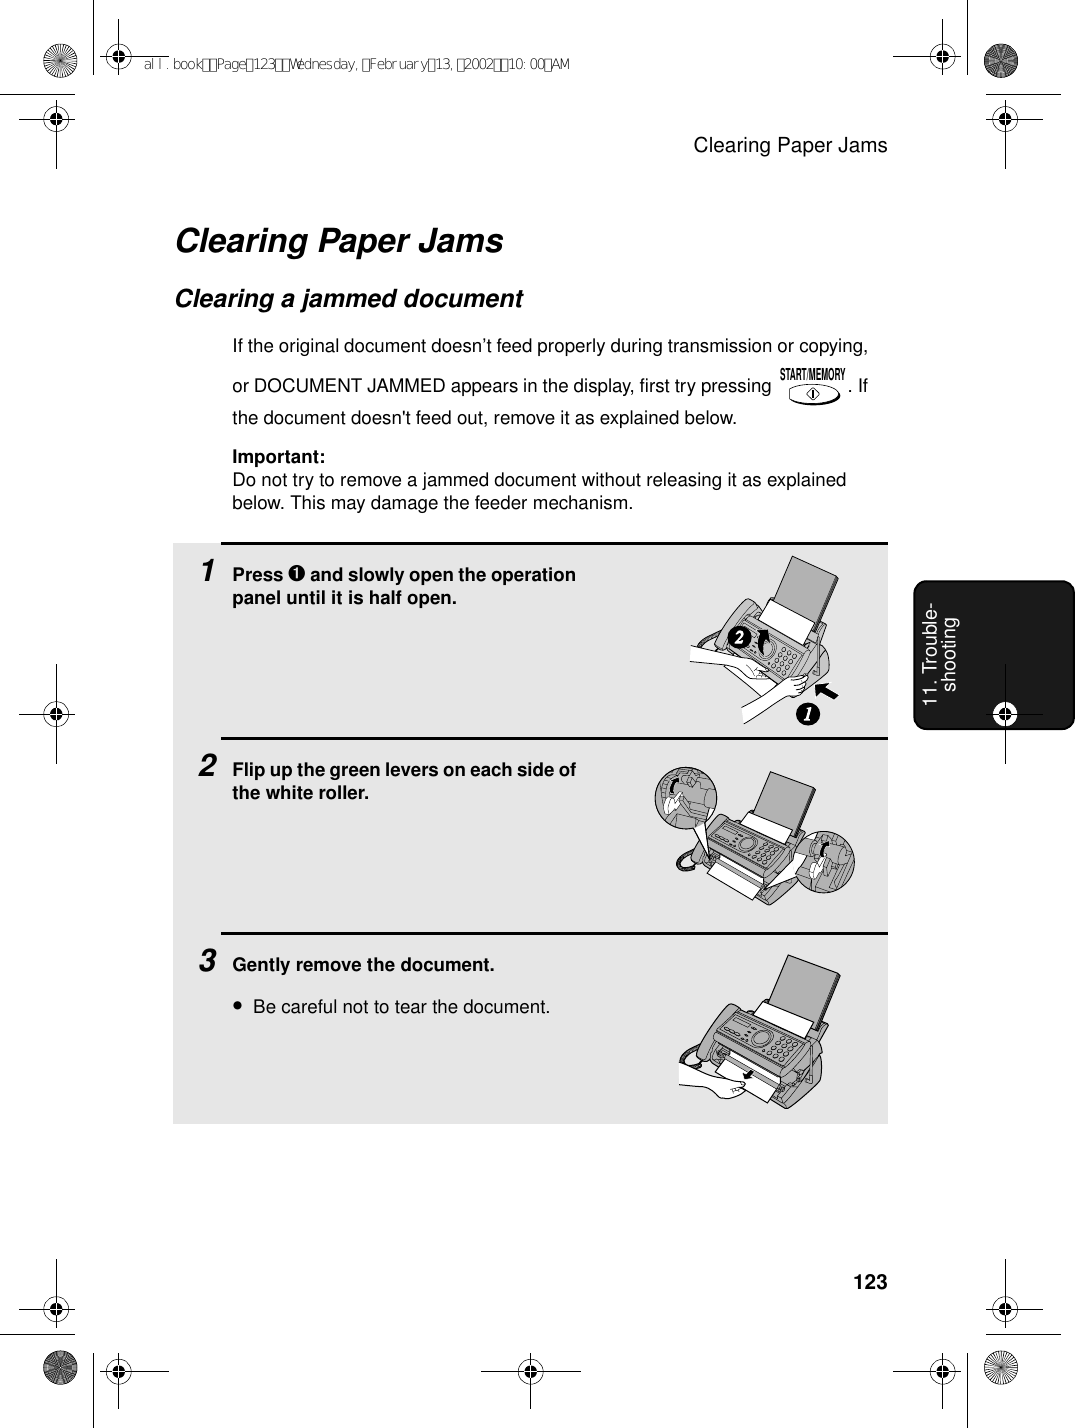 Clearing Paper Jams12311. Trouble-shootingClearing Paper JamsClearing a jammed documentIf the original document doesn’t feed properly during transmission or copying, or DOCUMENT JAMMED appears in the display, first try pressing  . If the document doesn&apos;t feed out, remove it as explained below.Important:Do not try to remove a jammed document without releasing it as explained below. This may damage the feeder mechanism.START/MEMORY1Press ➊ and slowly open the operation panel until it is half open.2Flip up the green levers on each side of the white roller.3Gently remove the document.•Be careful not to tear the document.12all.bookPage123Wednesday,February13,200210:00AM